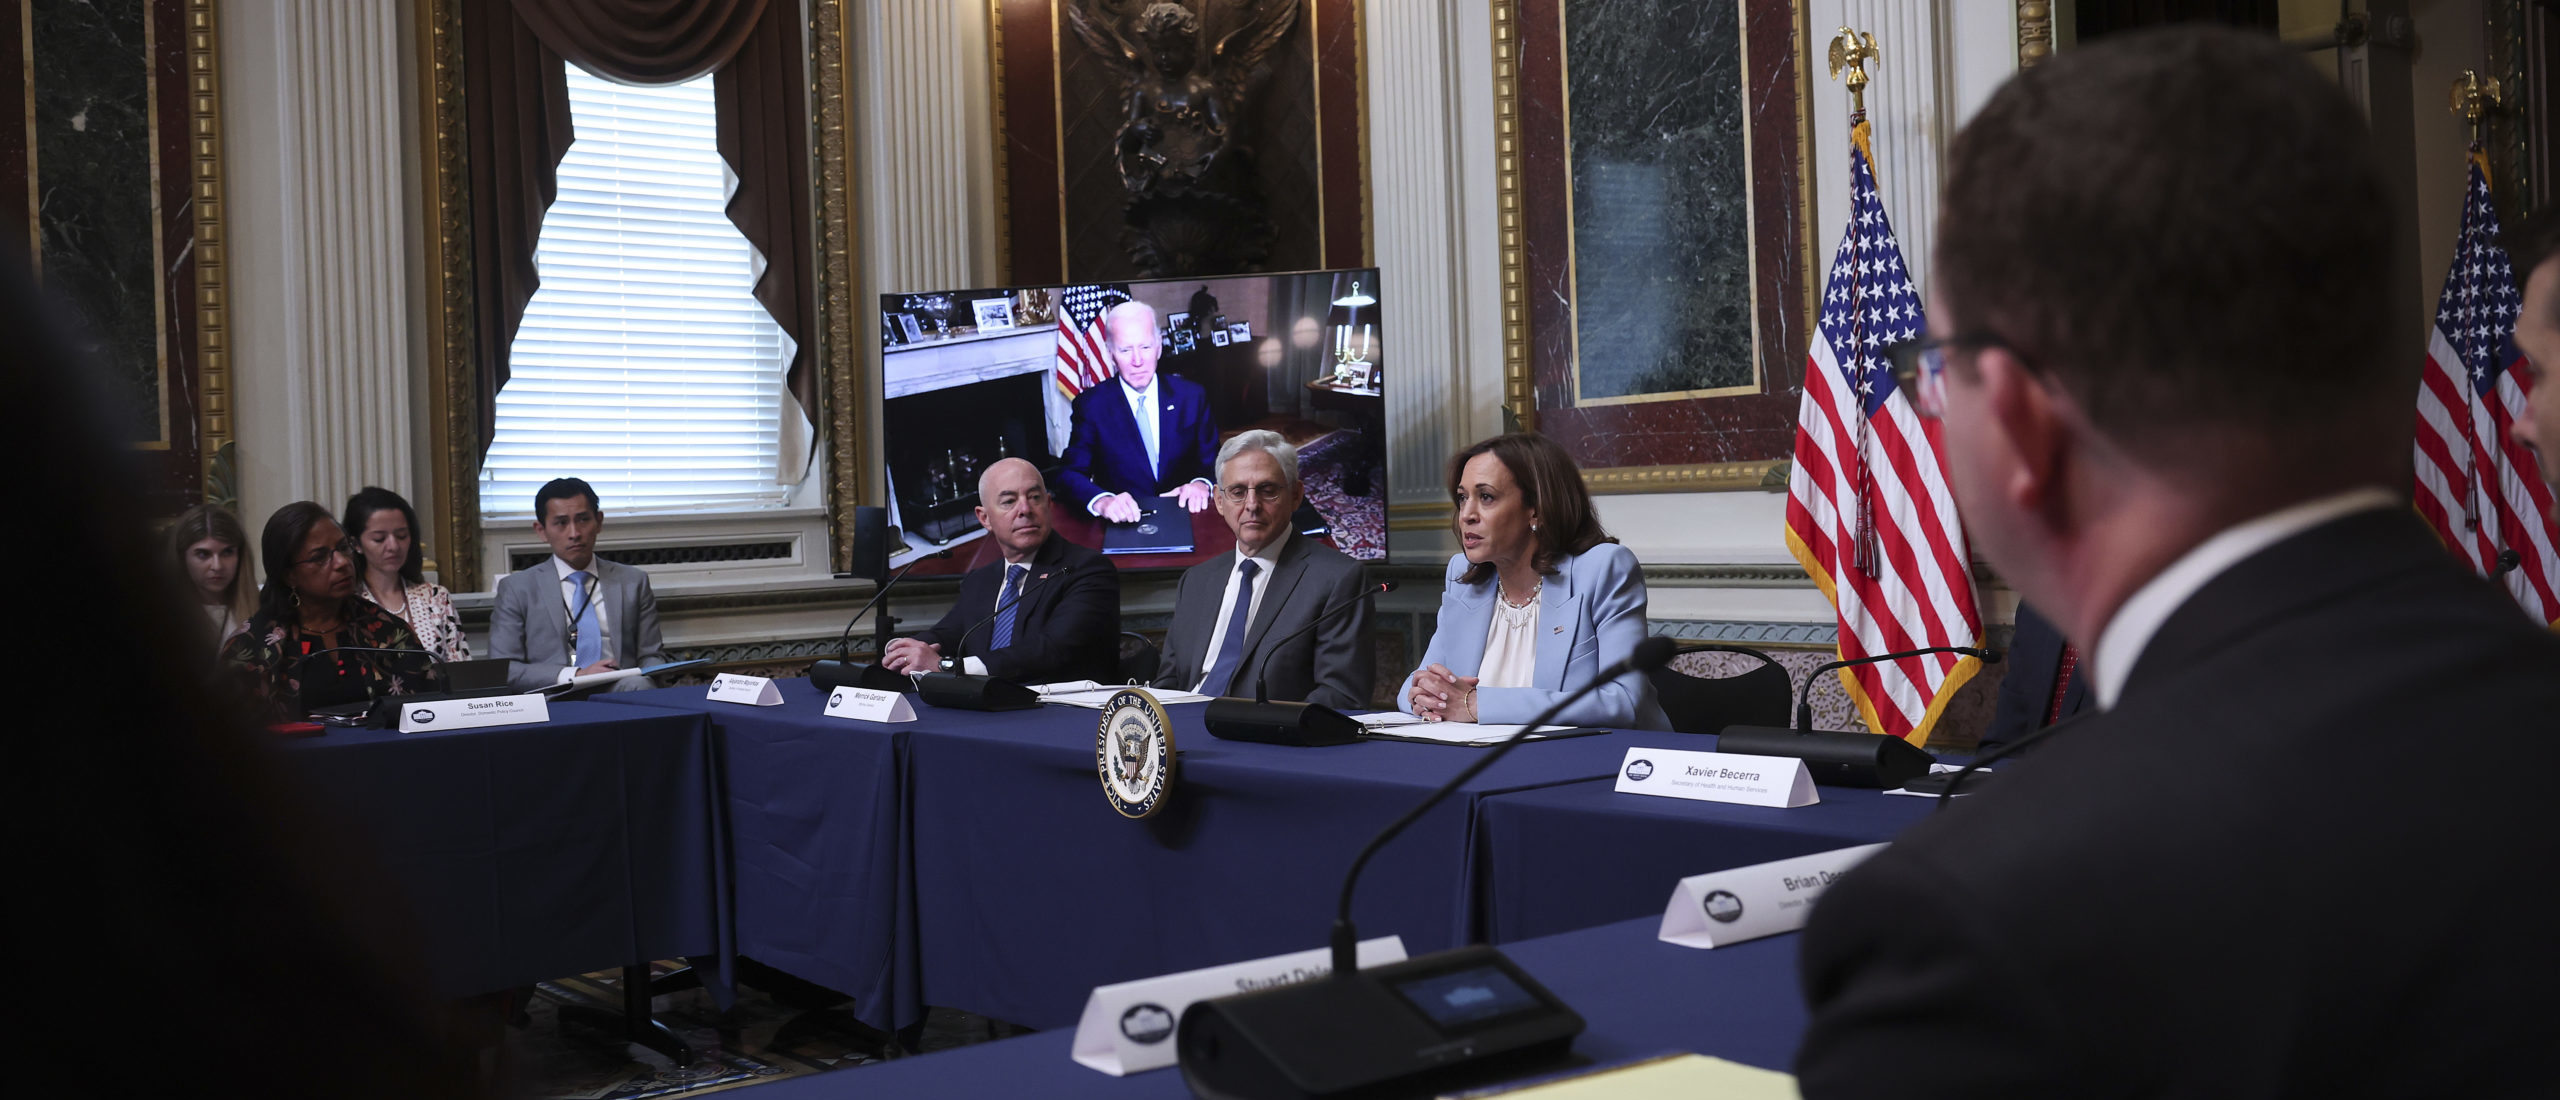 WASHINGTON, DC - AUGUST 03: U.S. President Joe Biden, appearing via teleconference, delivers remarks at a meeting of the Task Force on Reproductive Healthcare Access during an event at the White House complex August 3, 2022 in Washington, DC. (Photo by Win McNamee/Getty Images)